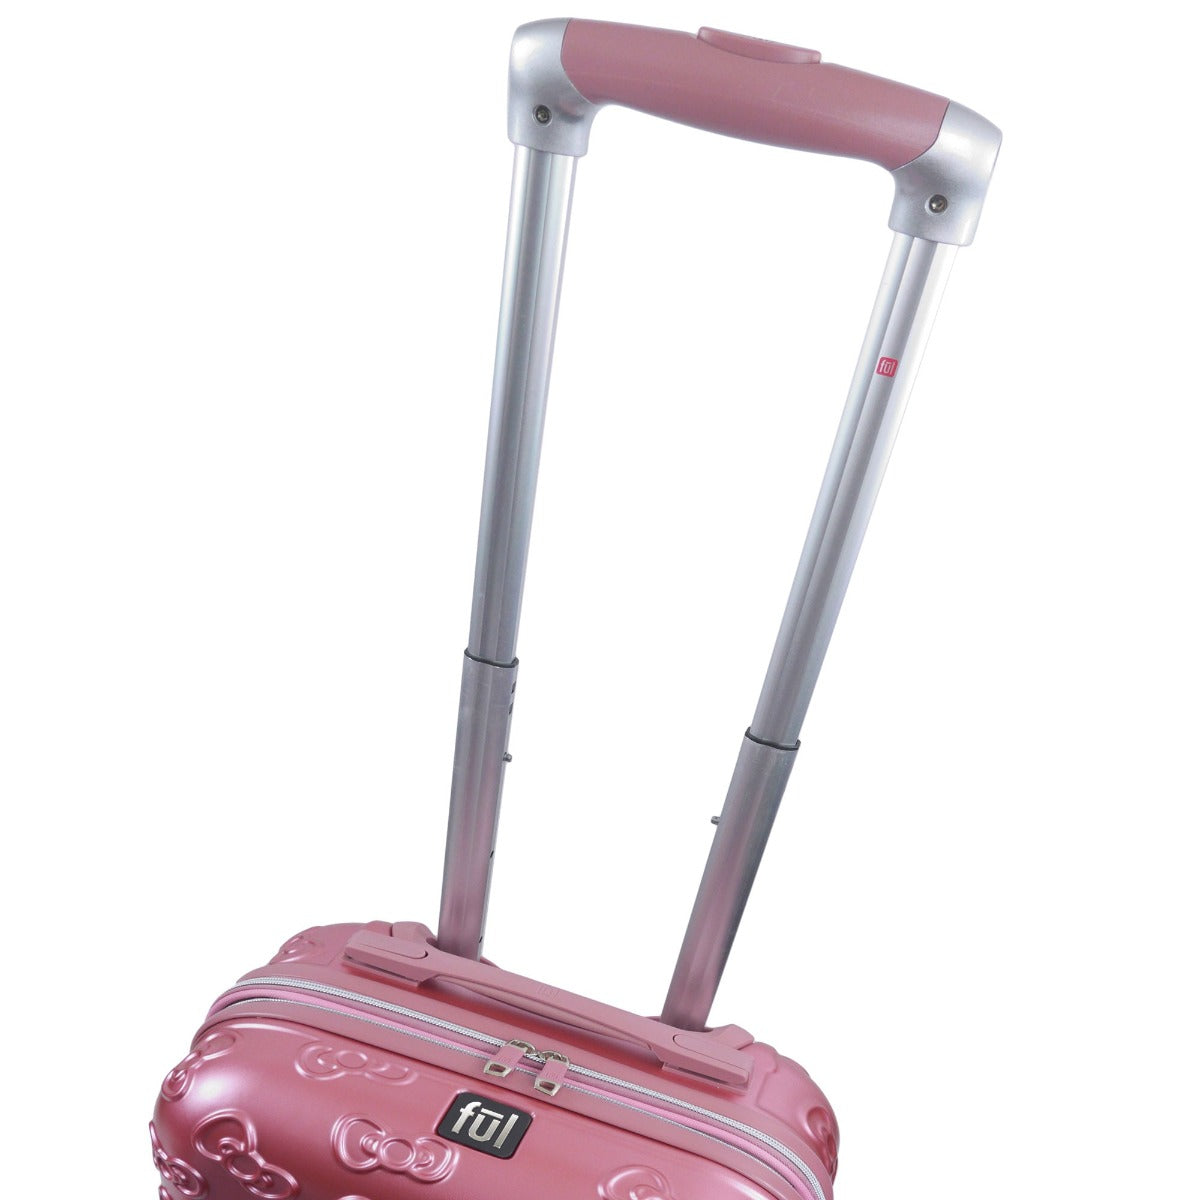 Ful X Hello Kitty Molded Portrait 22.5" pink luggage - best hard side carry-on spinner suitcase for traveling